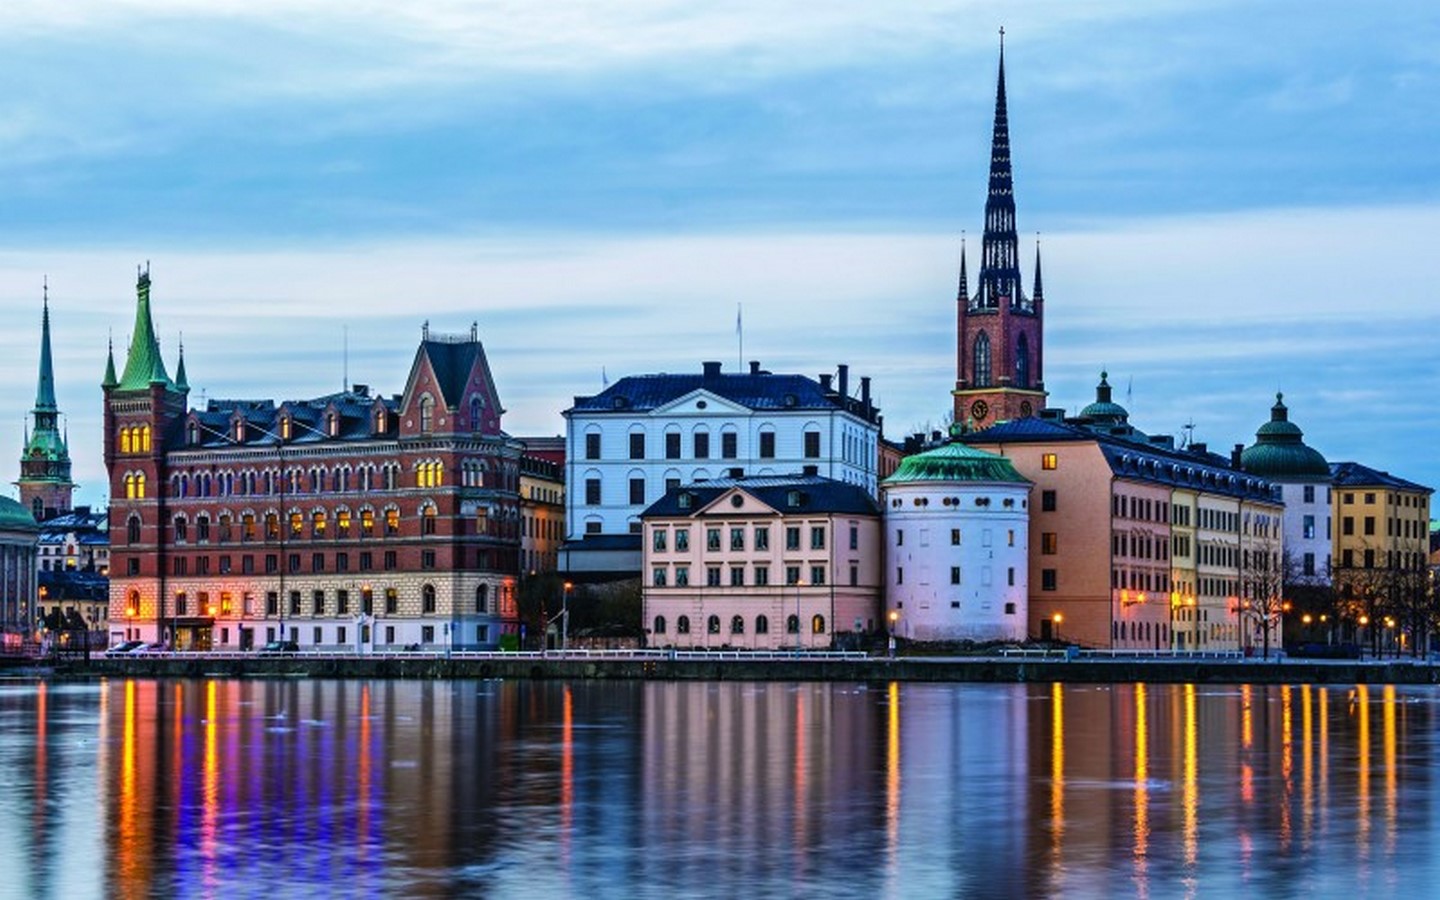 Which Stockholm neighborhood is known for its high-end shopping district?